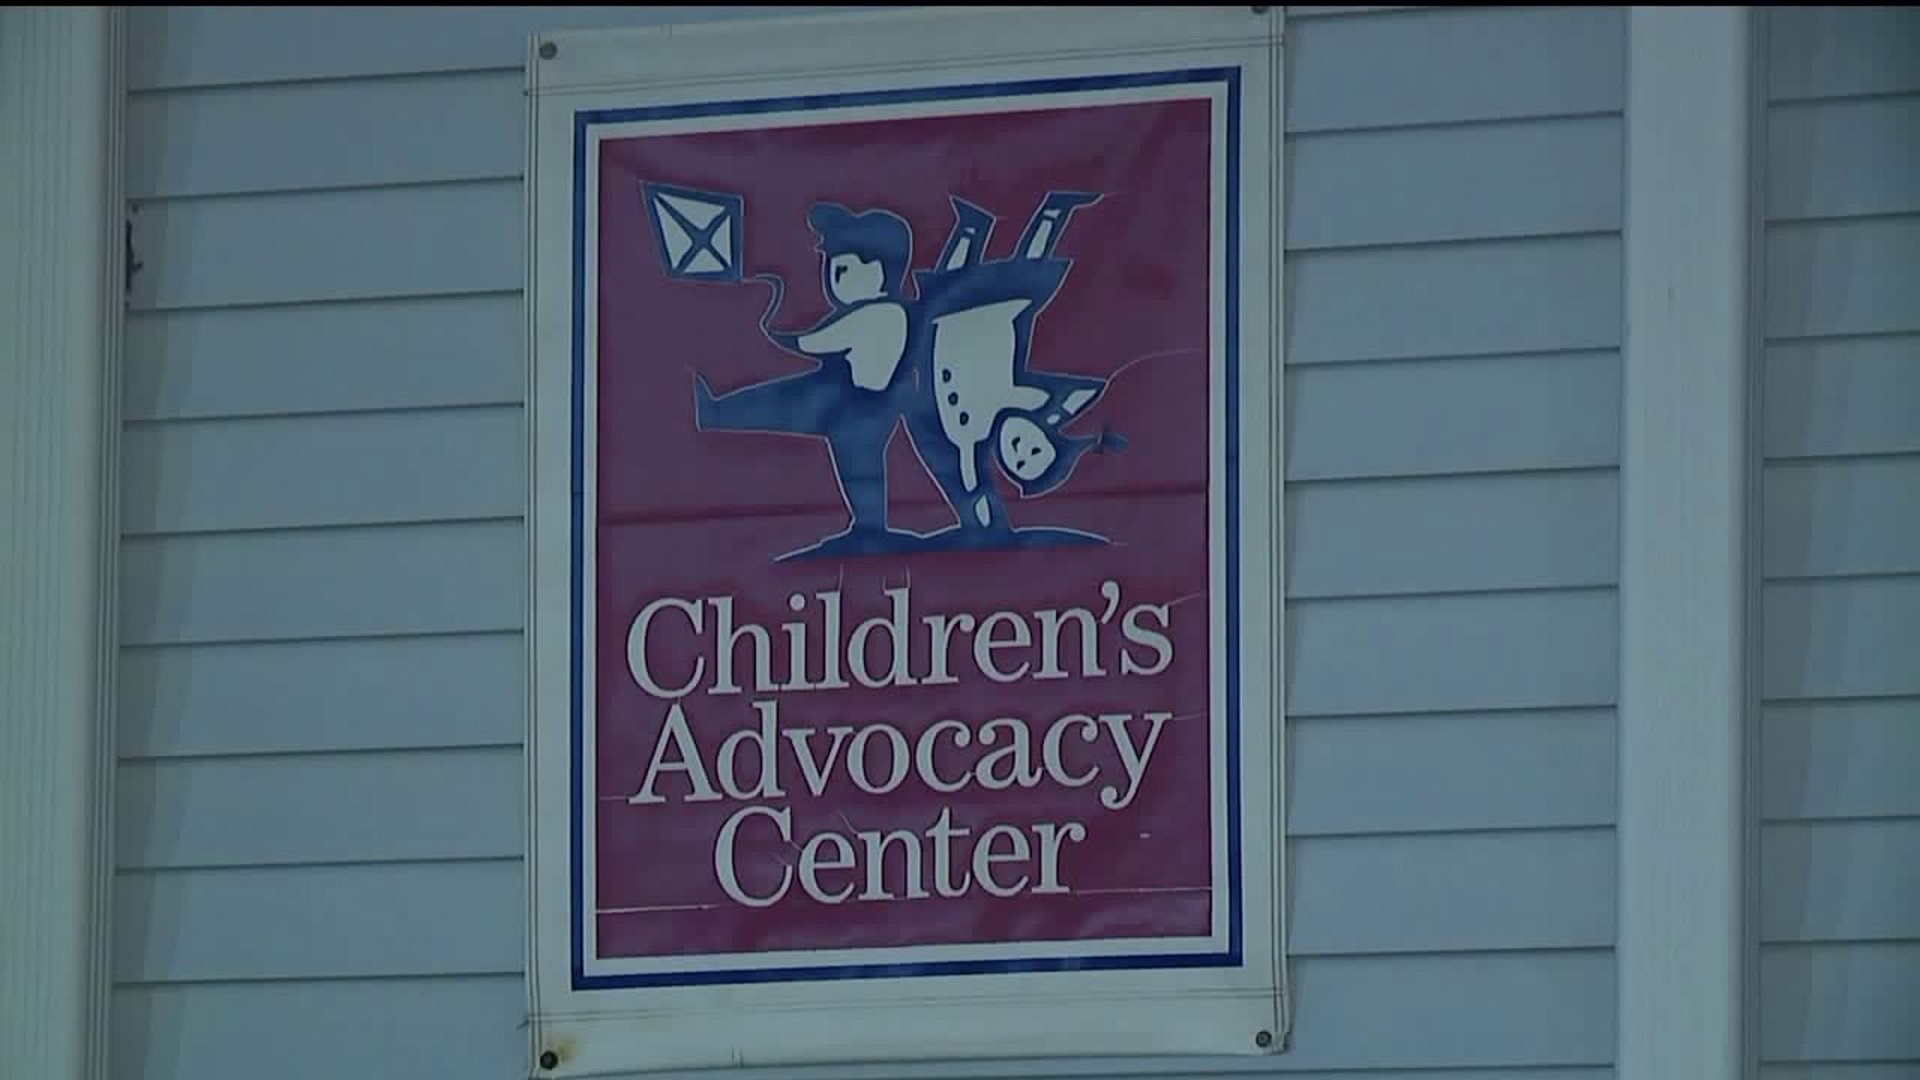 Child Advocacy Talks About Their Role in Child Abuse Cases in Light on Horrific Abuse Case